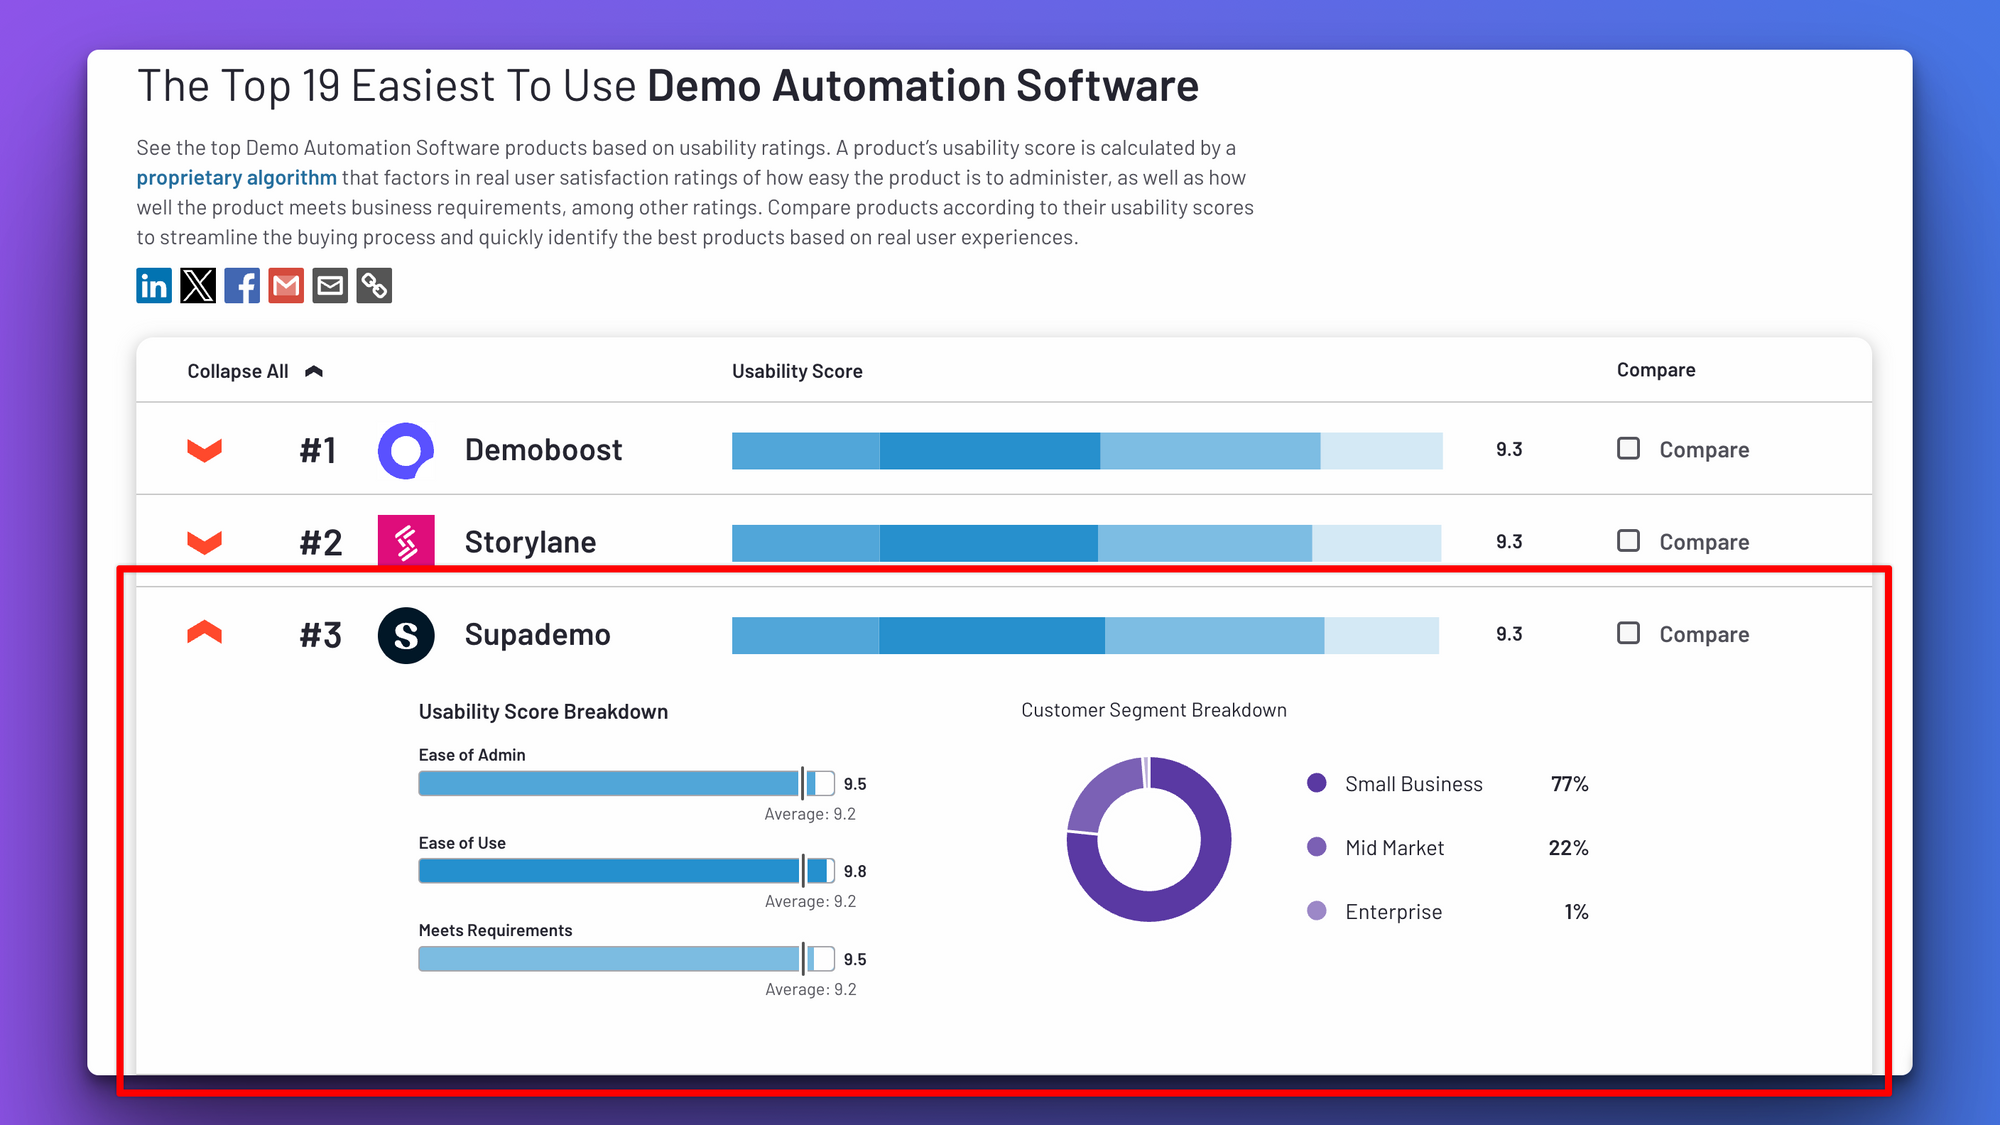 Supademo ranked #3, tied with Demoboost and Storylanne as one of the easiest to use interactive demo software 